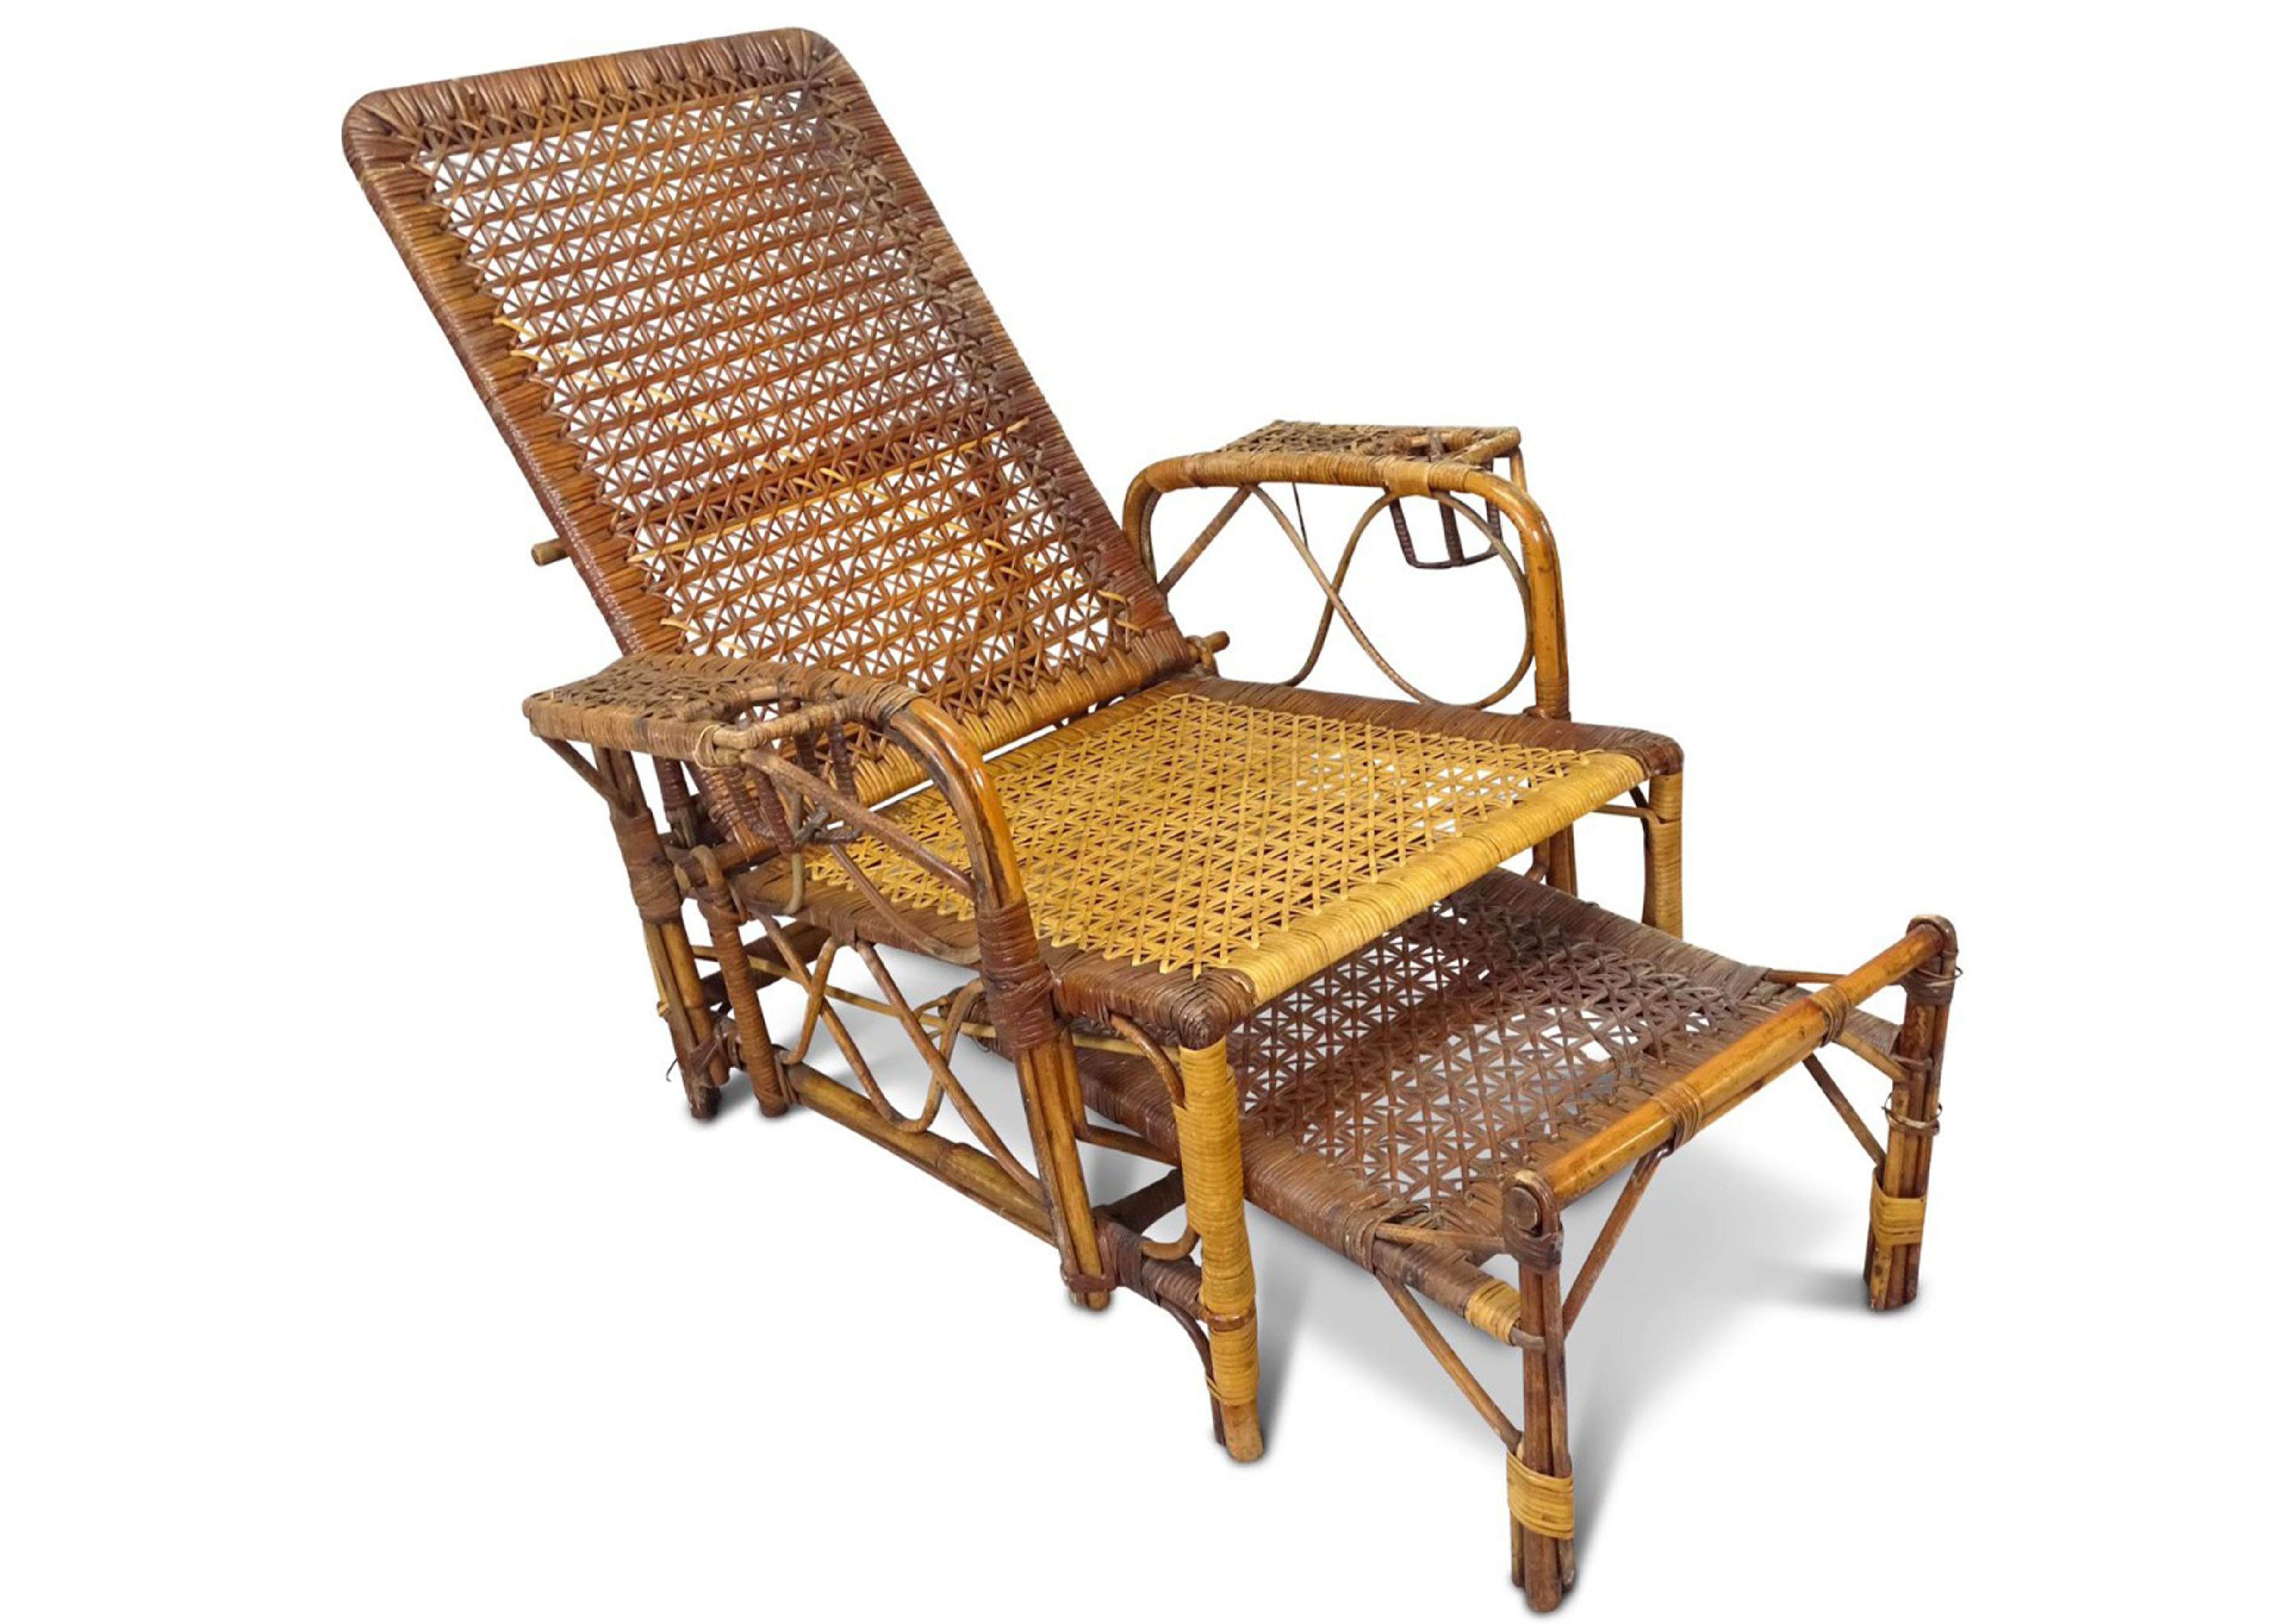 A British Colonial Formed Bamboo & Cane Reclining Steamer armchair with Pull Out Footrest 1900's

Exquisite indoor or outdoor reclining chair suited to both period and modern home settings.
Featuring drinks bentwood formed drink holders.

